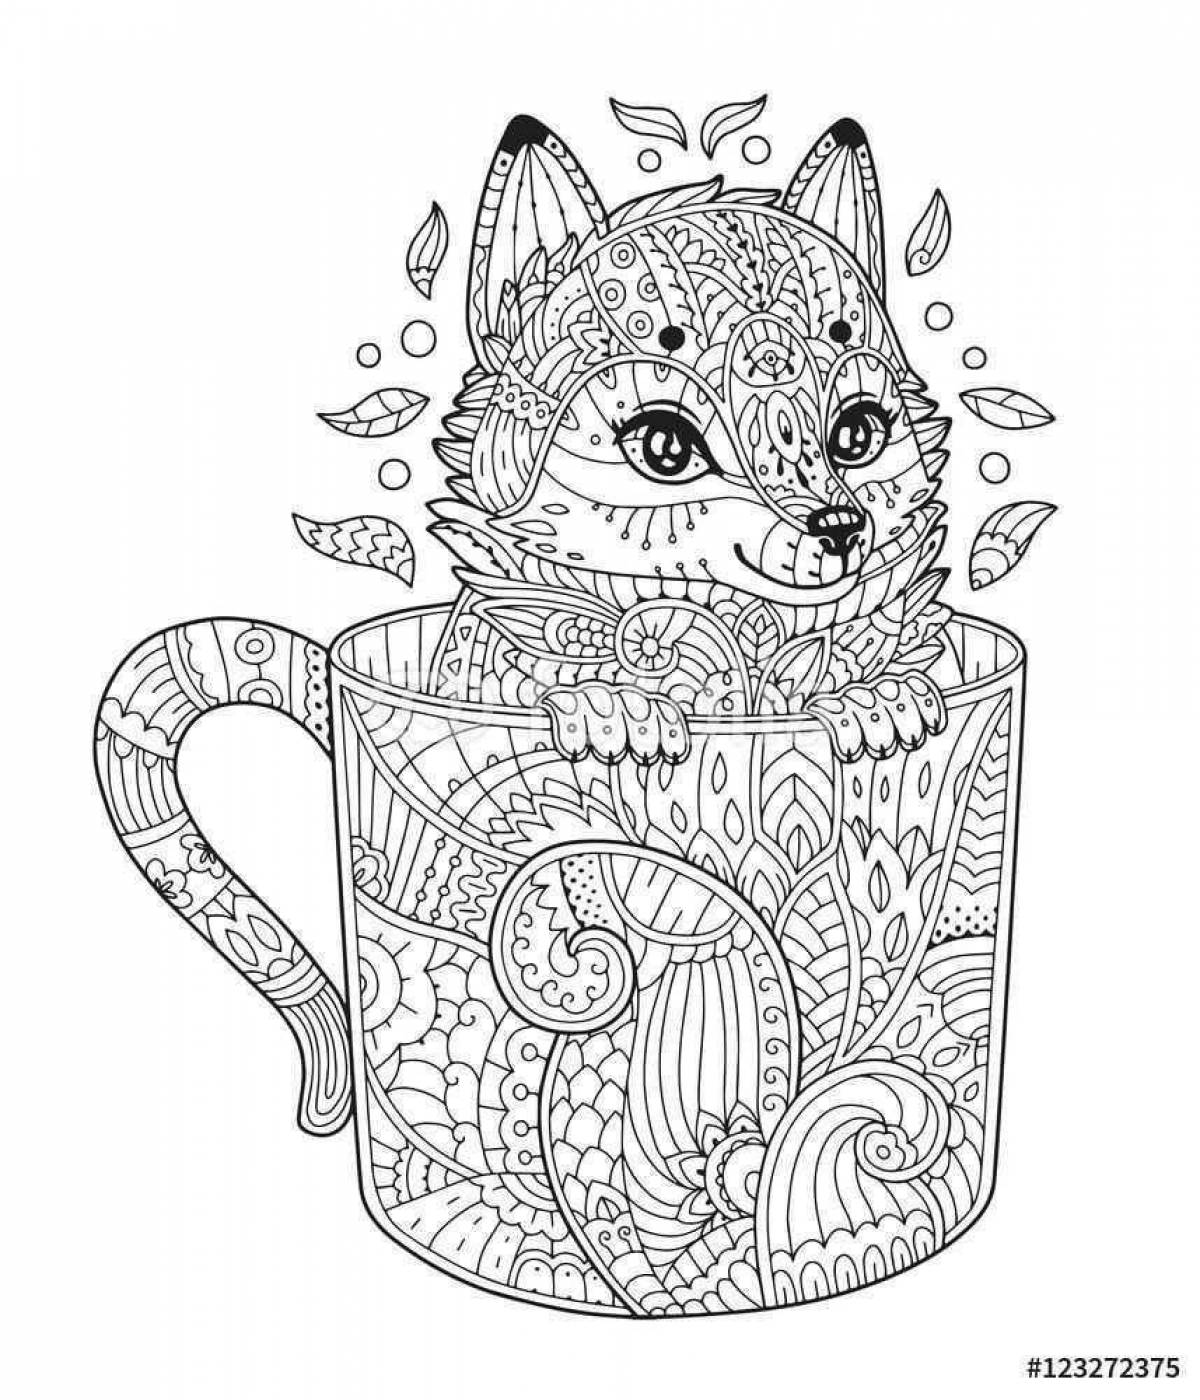 Relaxed kitten in a mug coloring book